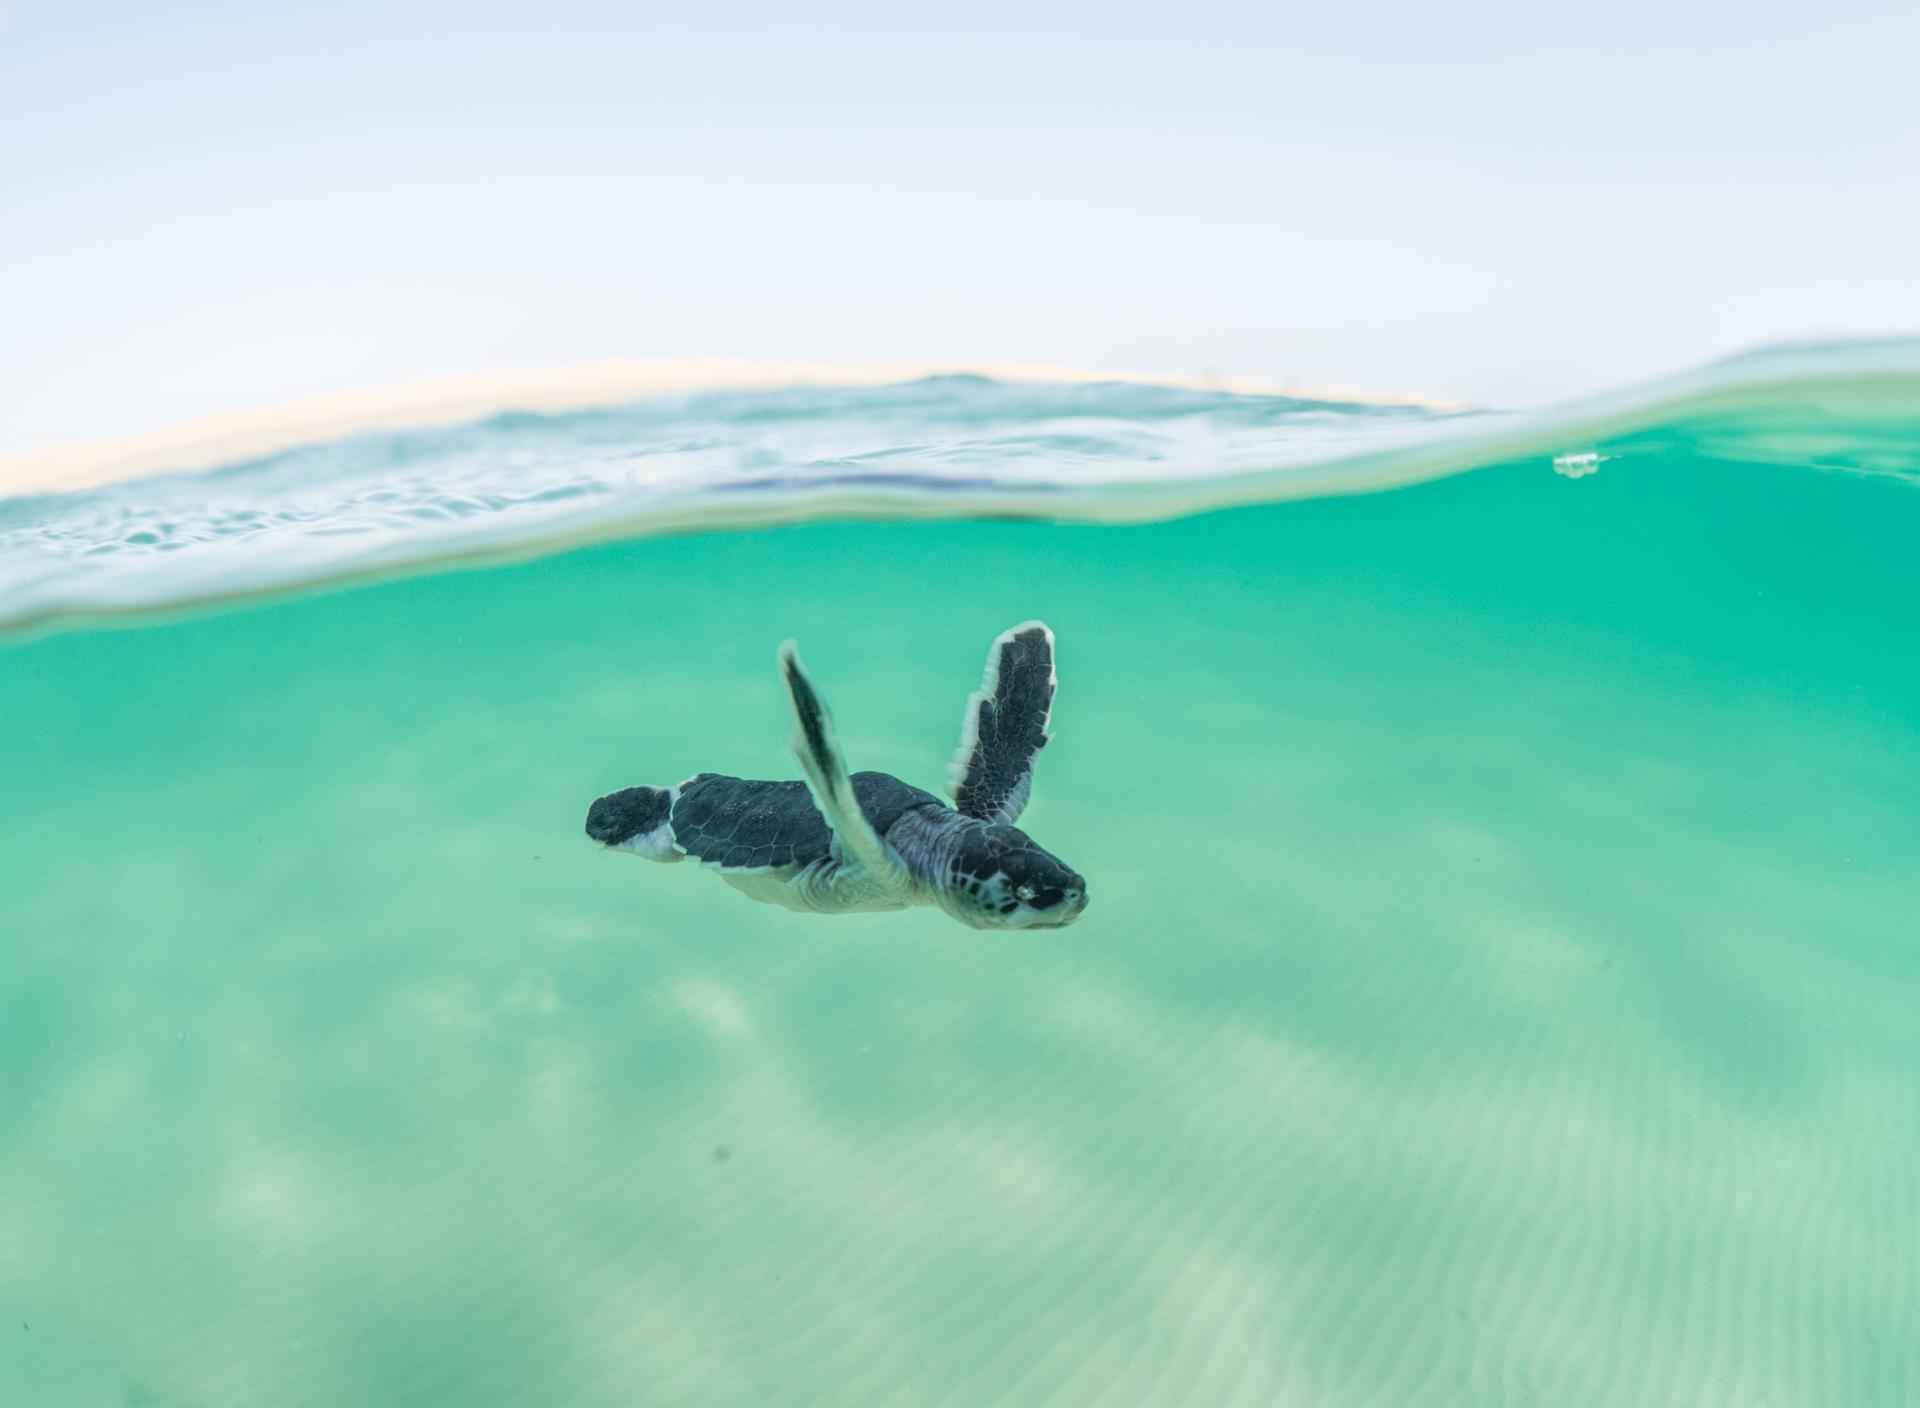 A Hawksbill turtle hatchling swimming and flourishing thanks to Amaala's regenerative approach to tourism and sustainability